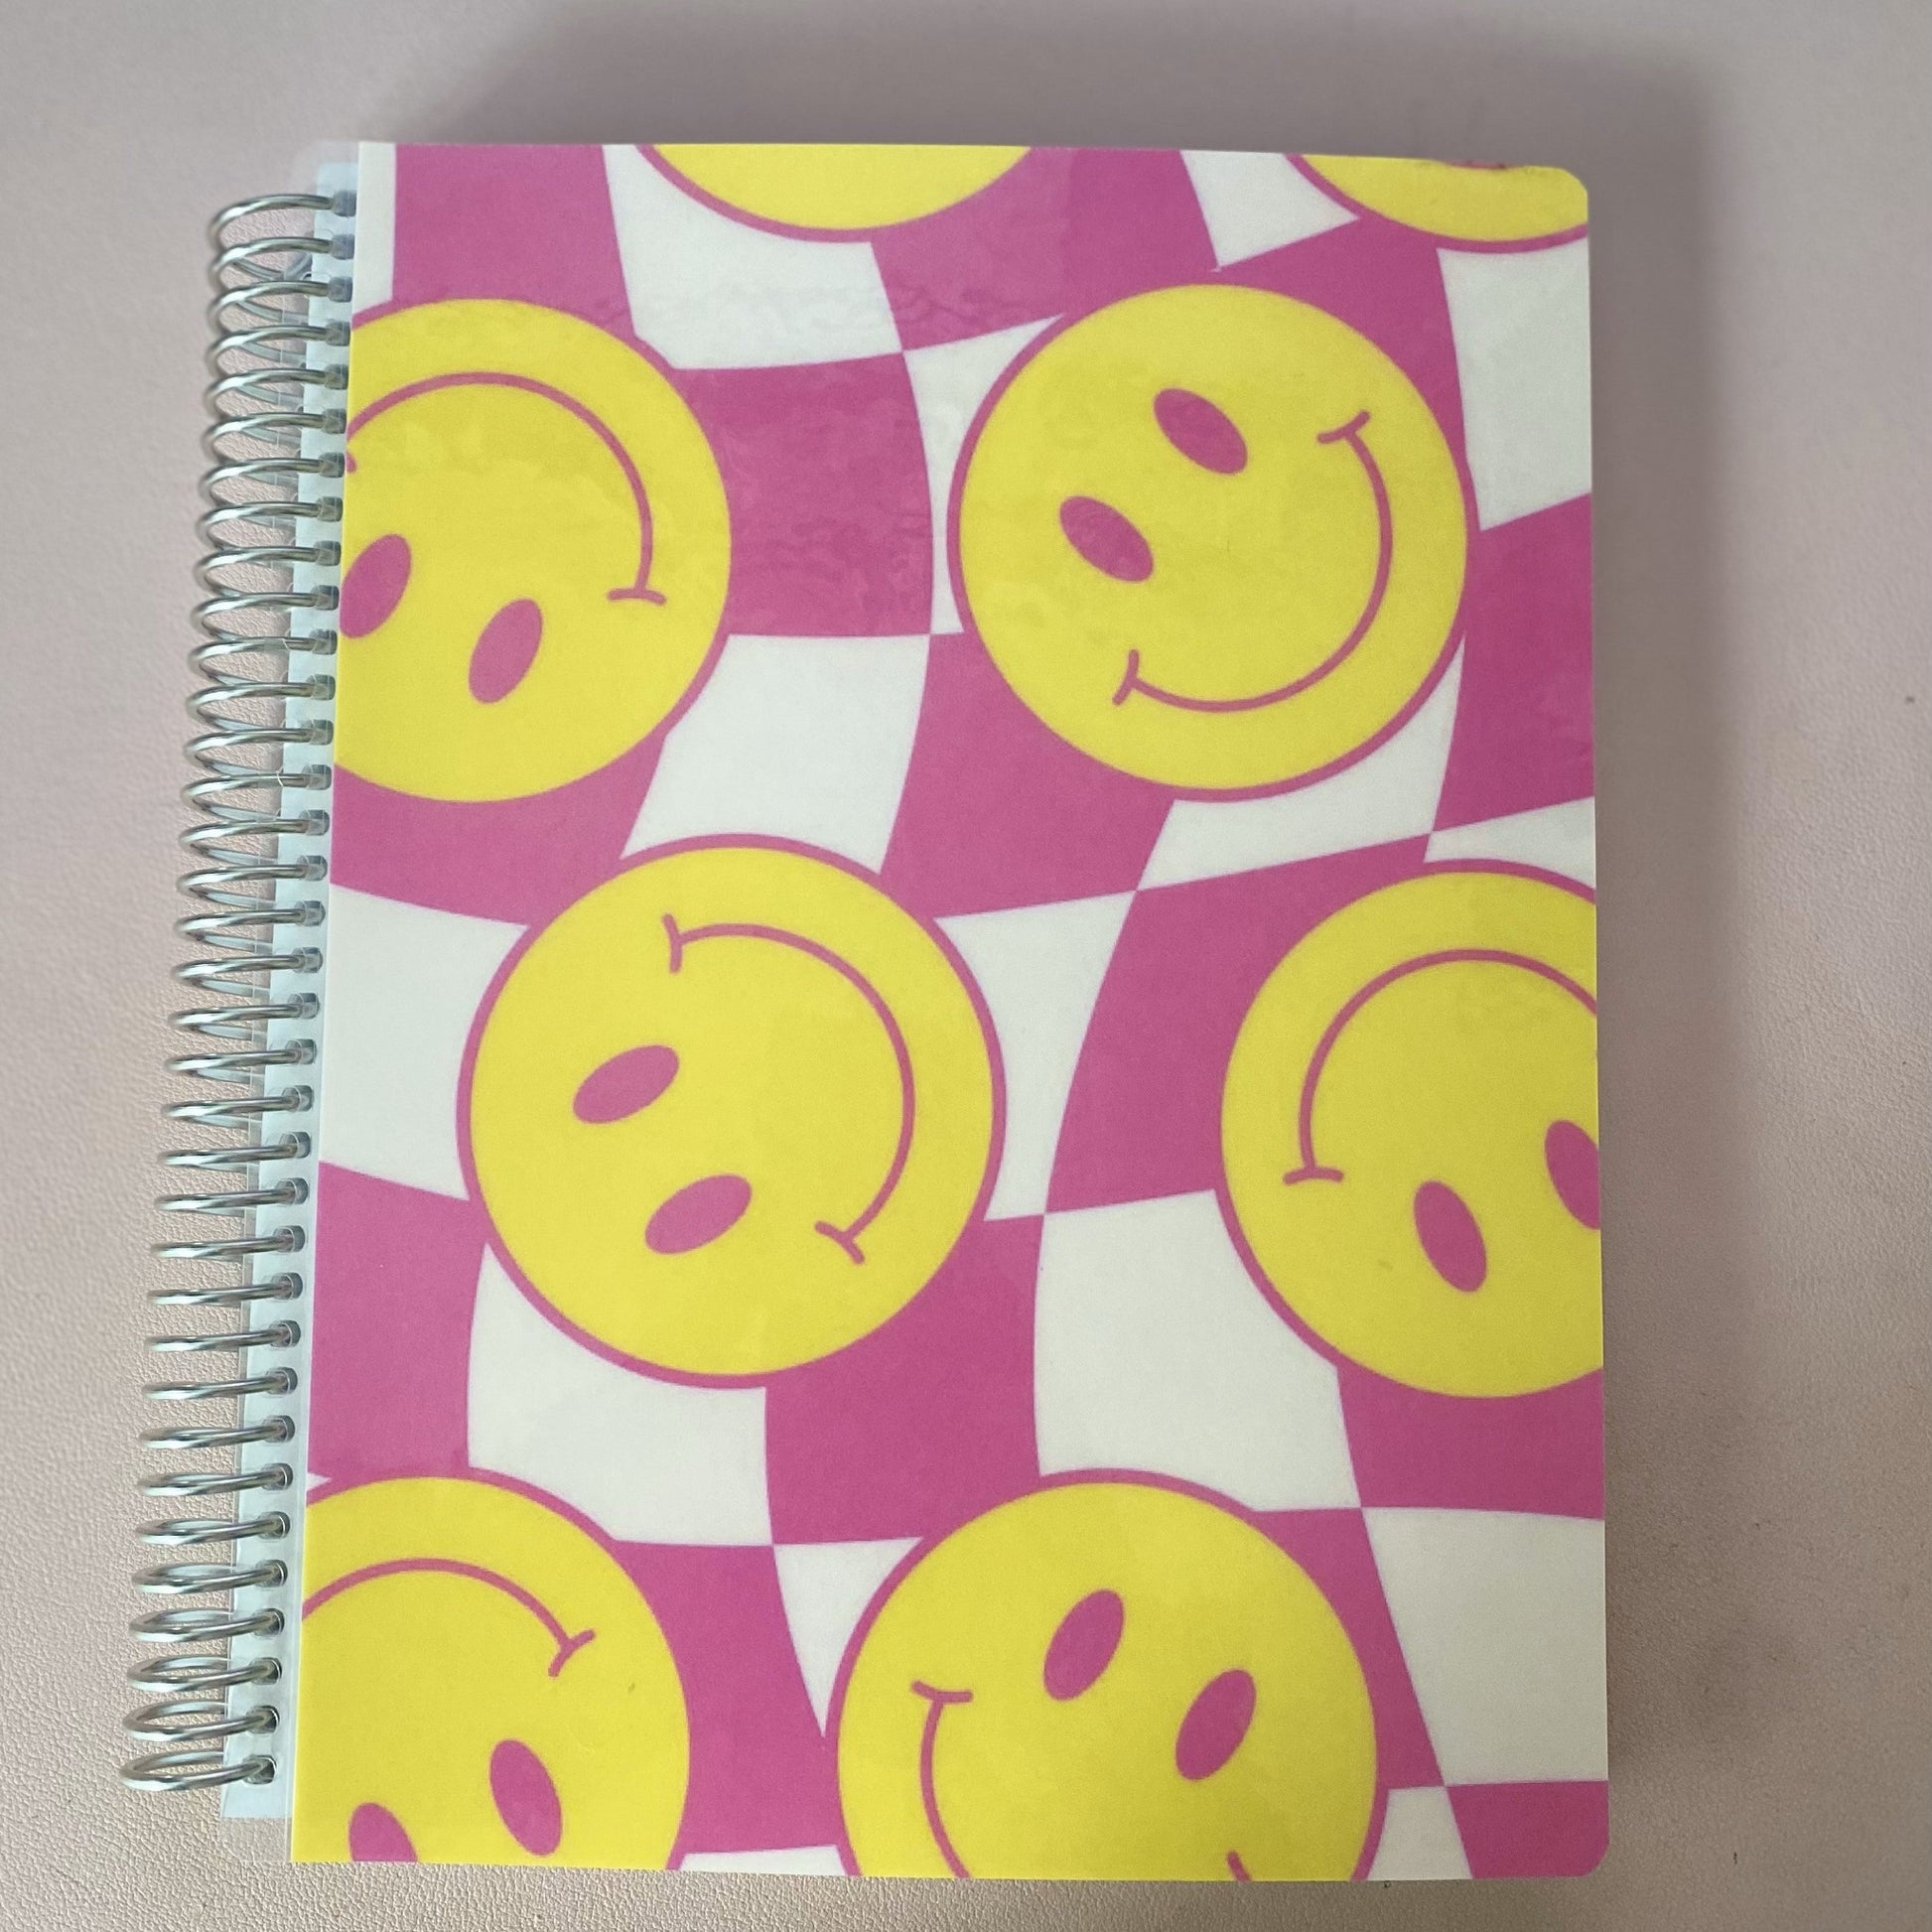 Daily Thoughts Notebook Smiley